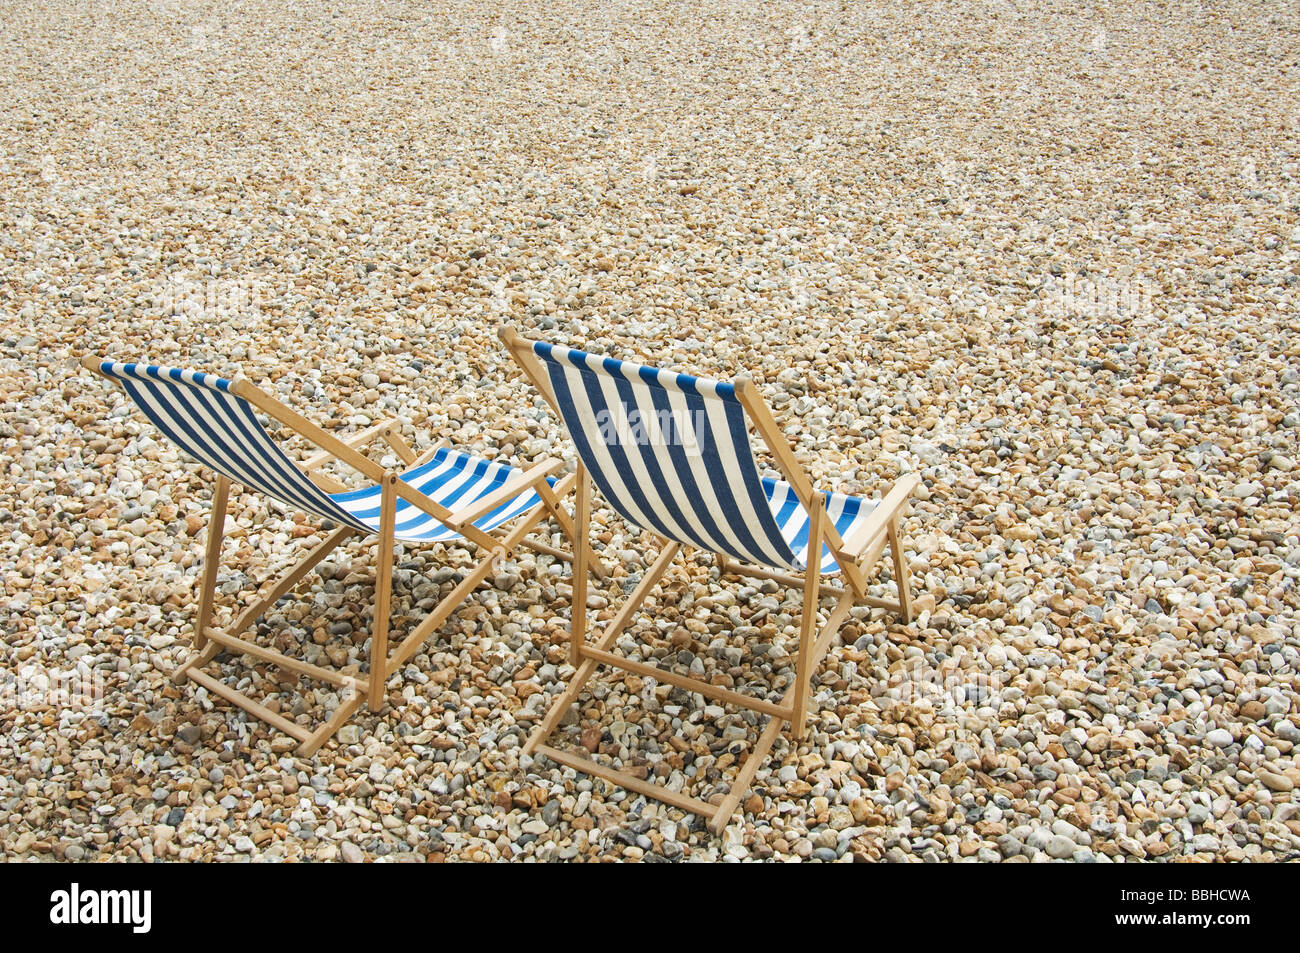 Two blue and white striped deck chairs on pebble beach Stock Photo